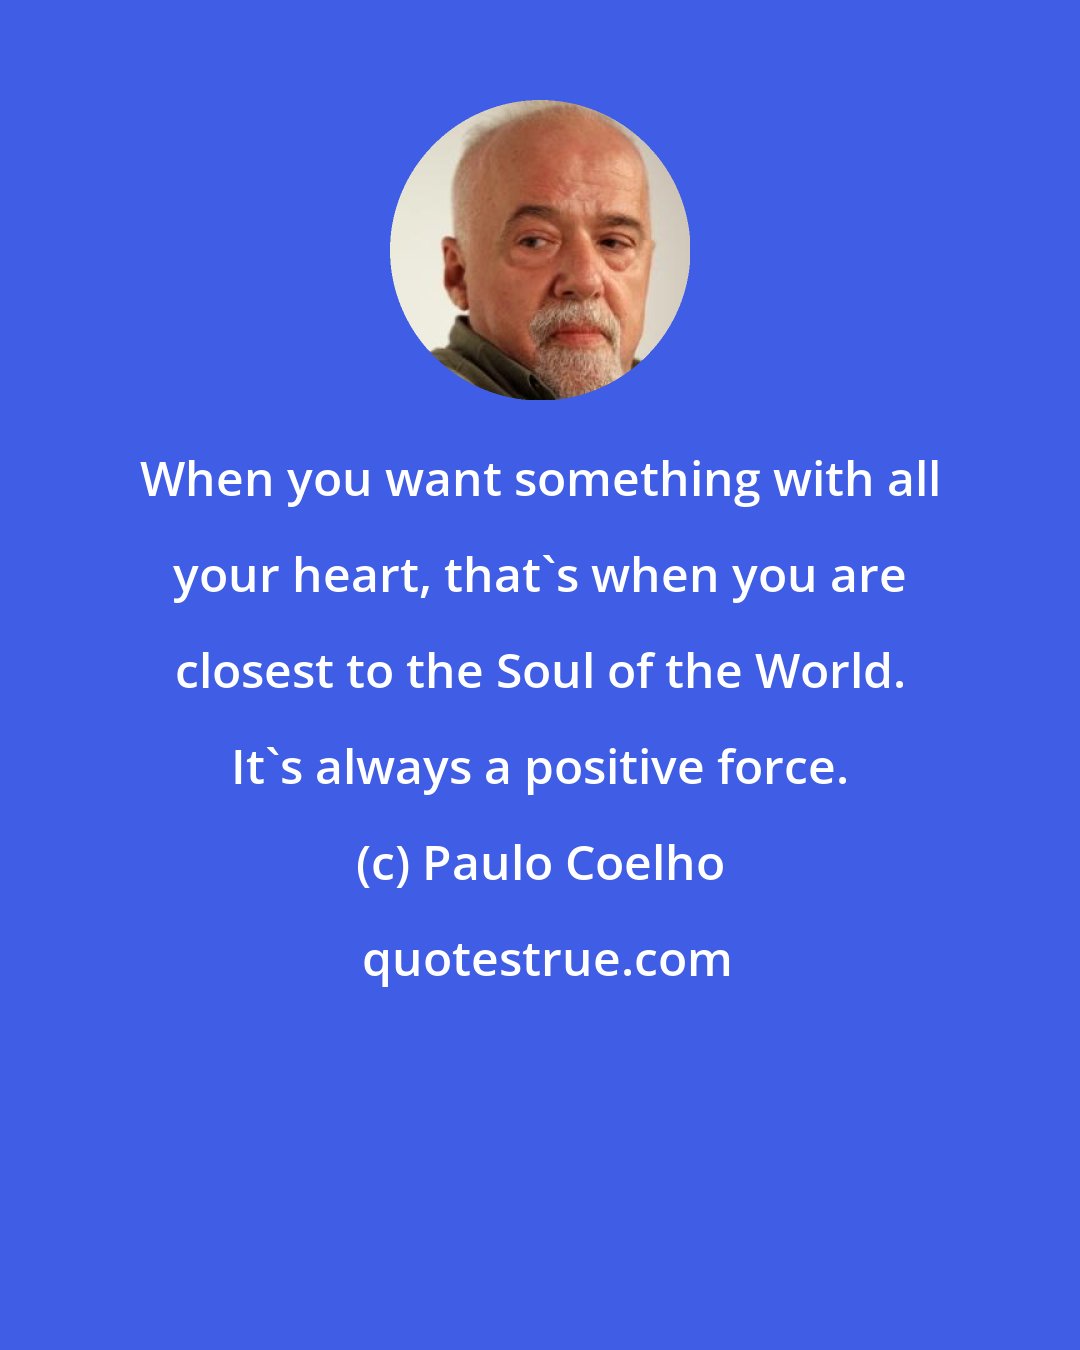 Paulo Coelho: When you want something with all your heart, that's when you are closest to the Soul of the World. It's always a positive force.